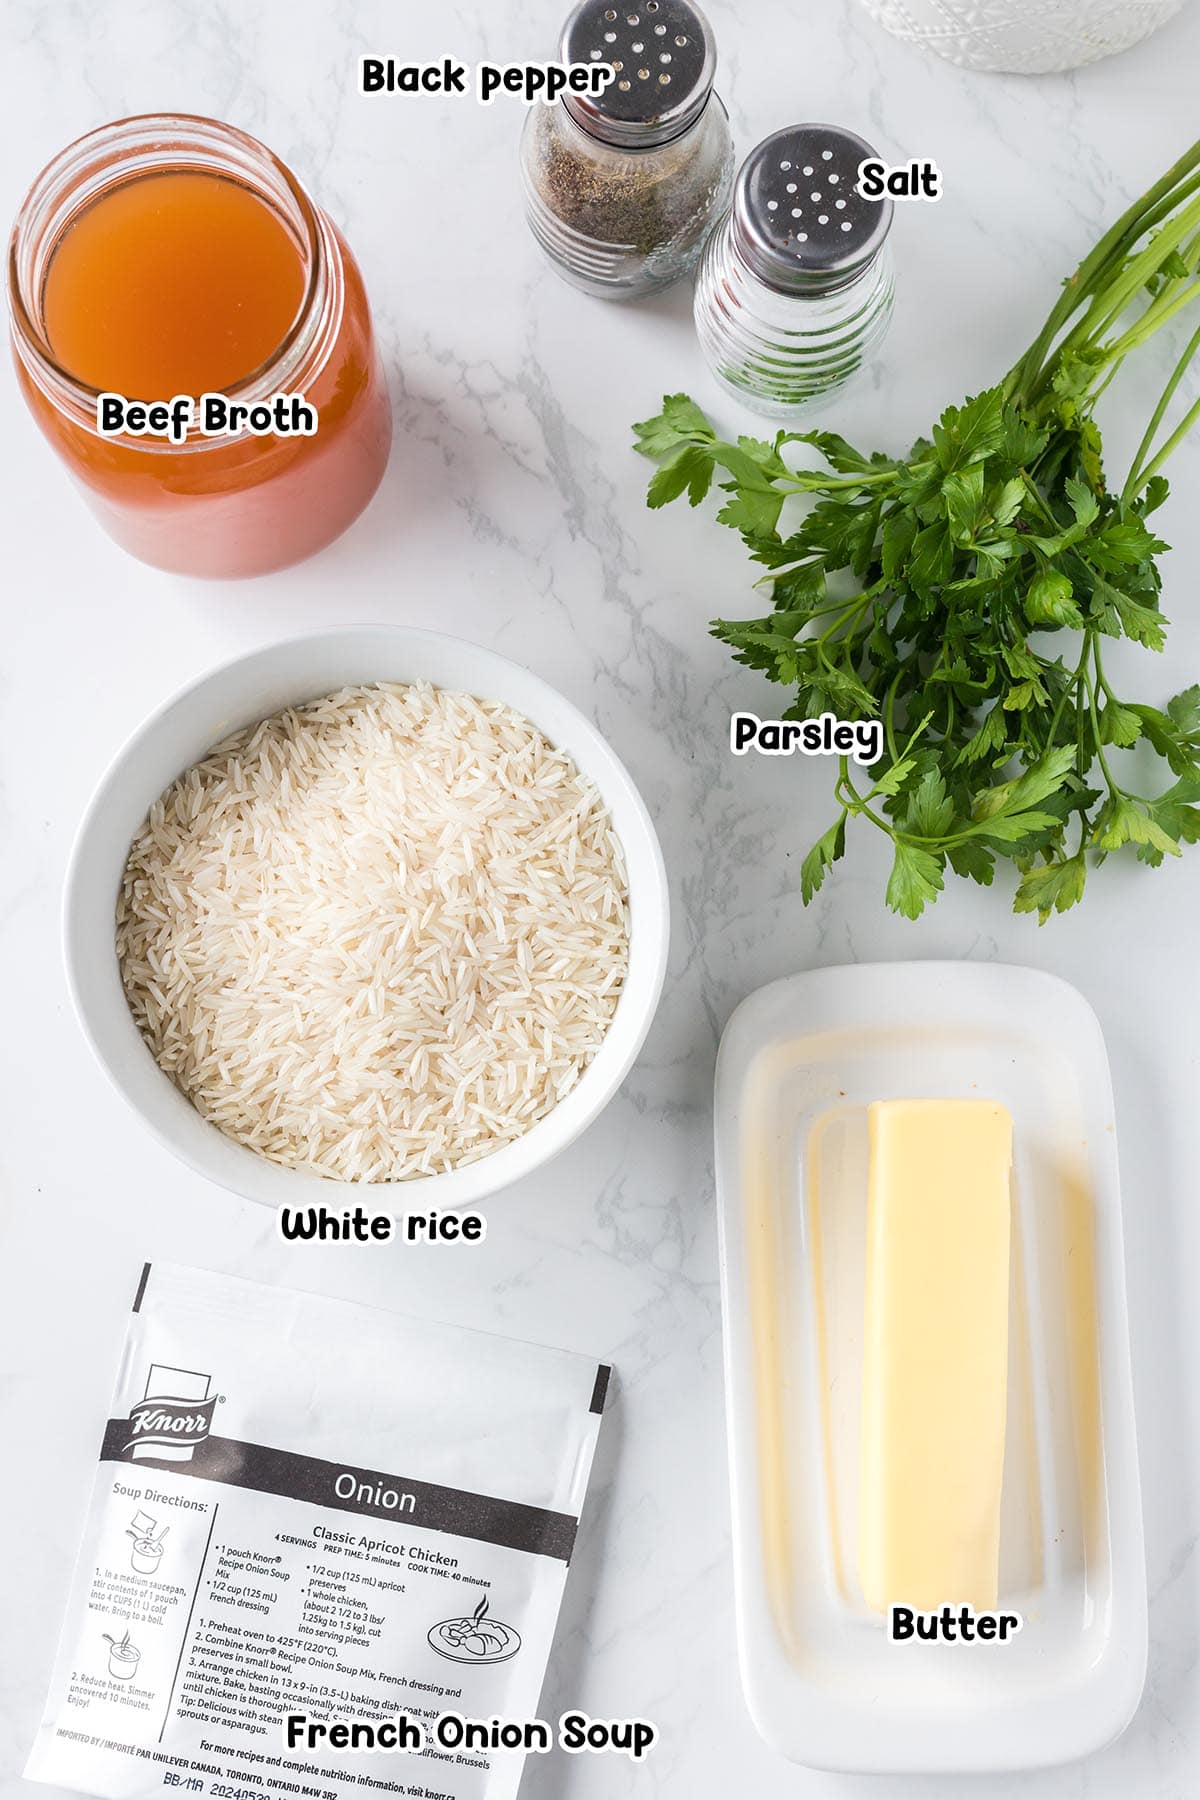 Stick of Butter Rice ingredients.